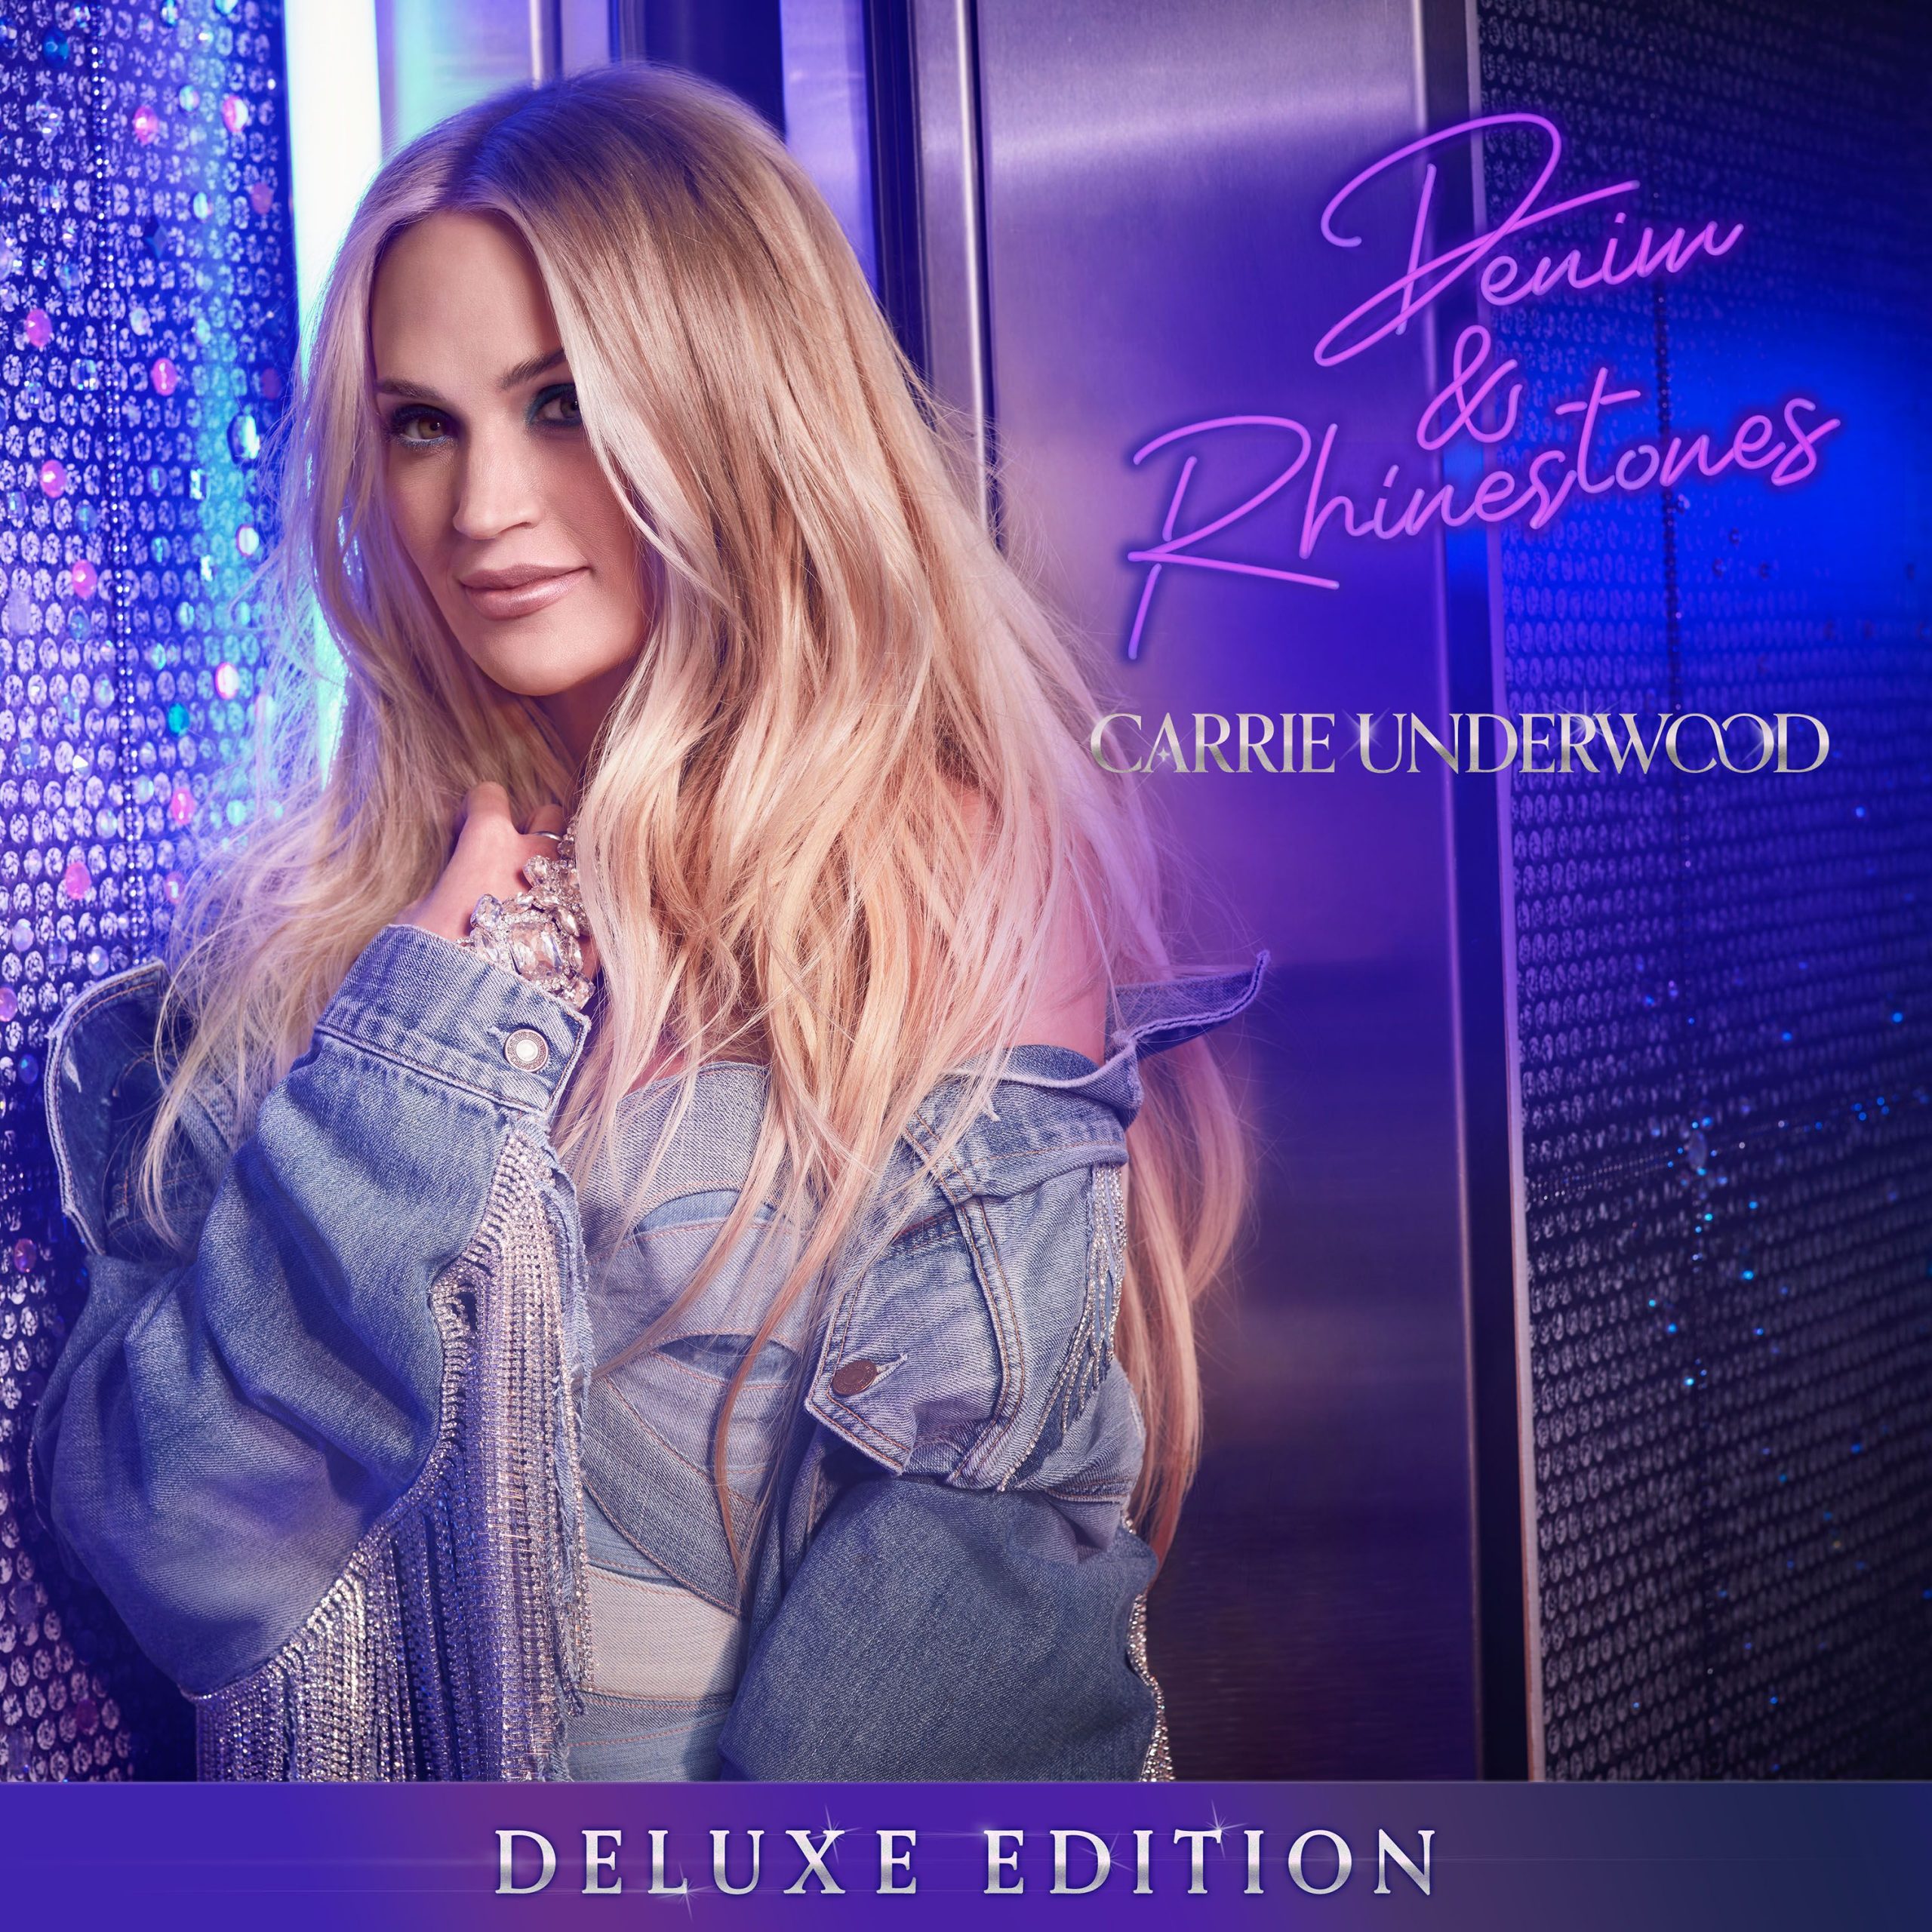 Global Superstar Carrie Underwood Announces Denim & Rhinestones (Deluxe Edition) Out Sept. 22